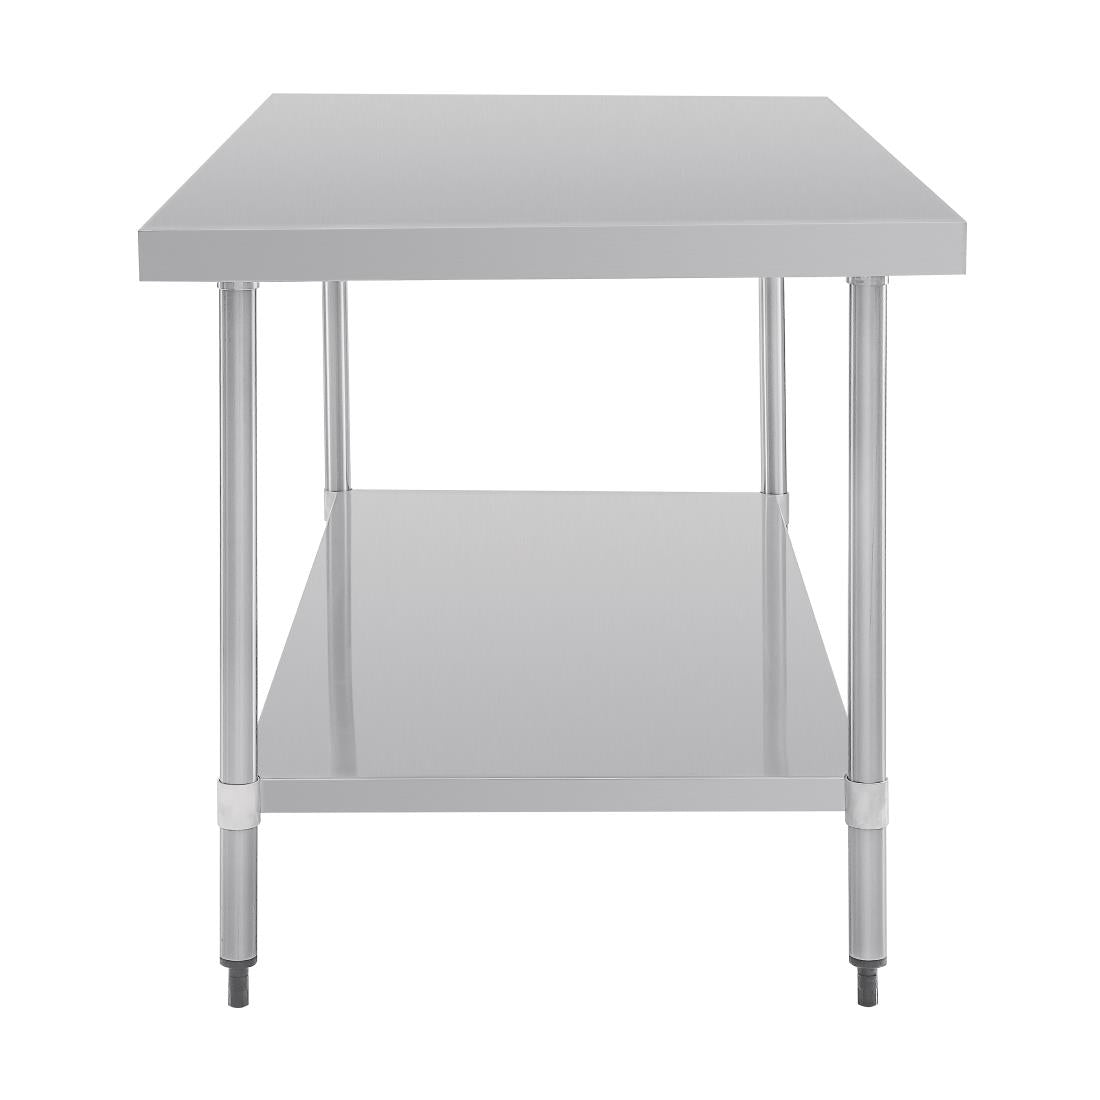 Vogue Stainless Steel Centre Table 1800mm